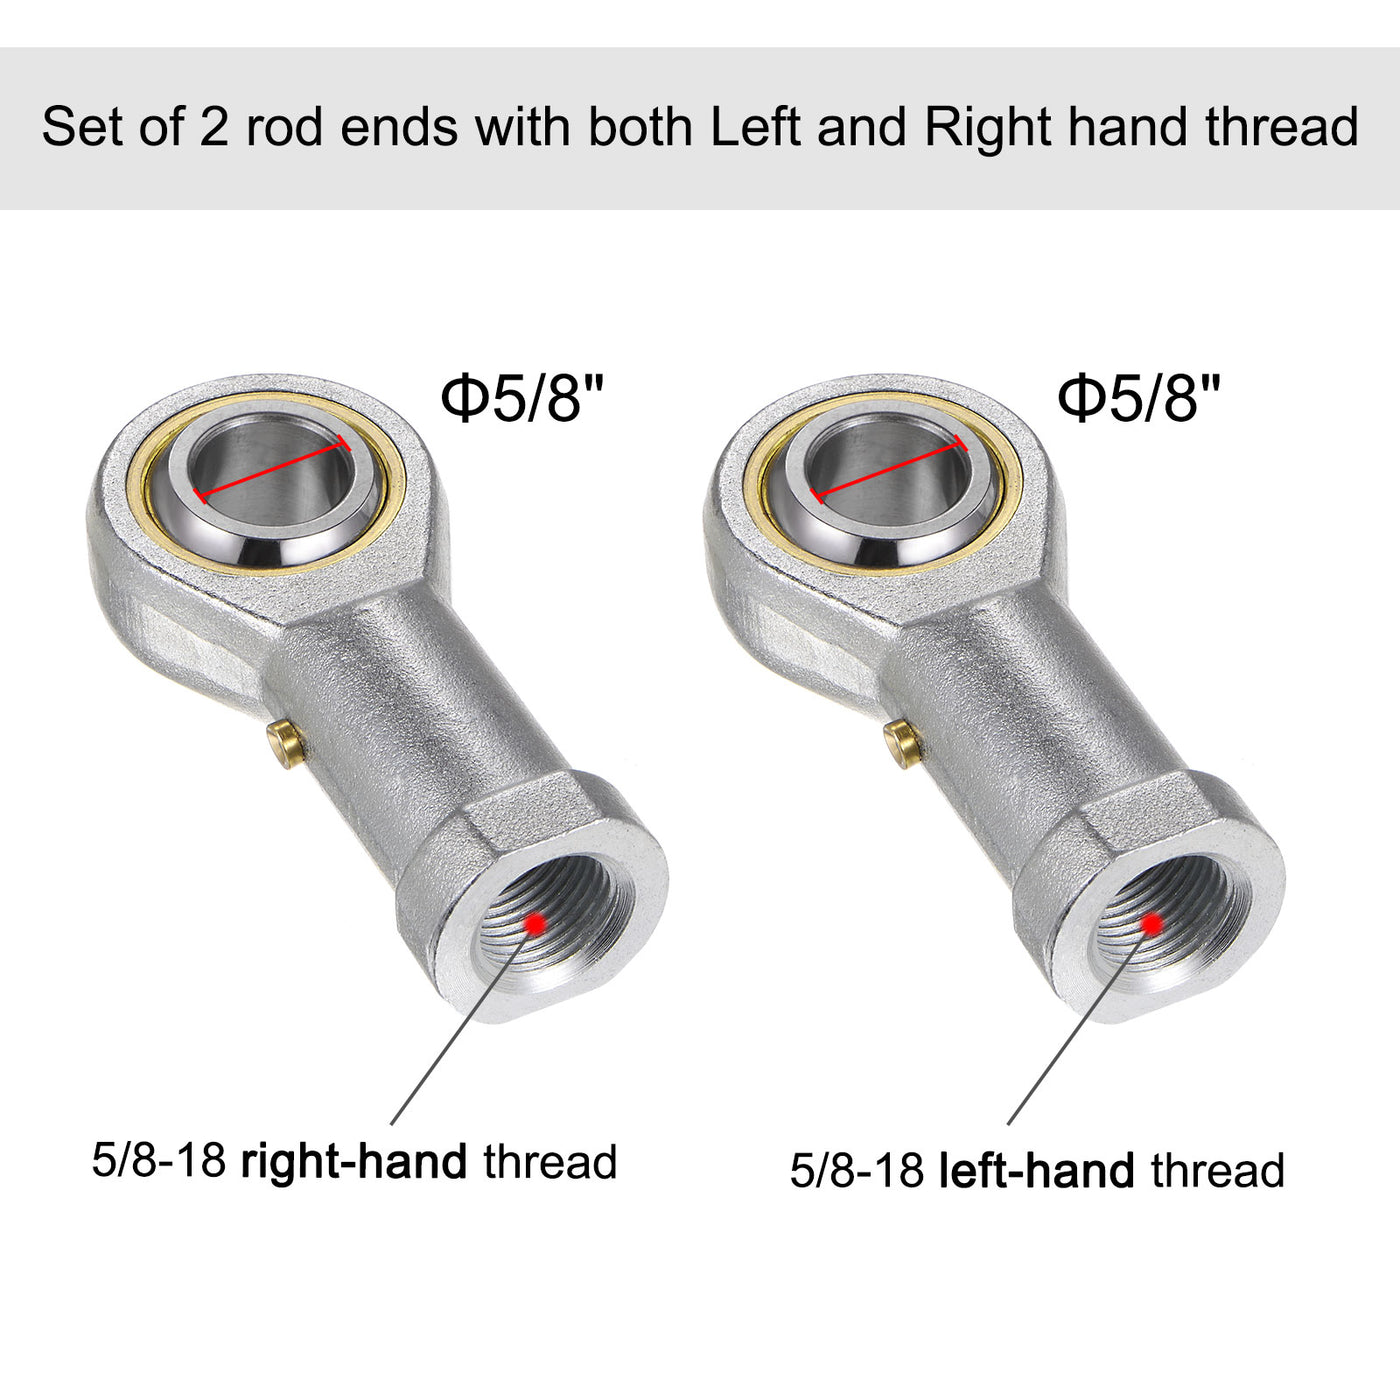 uxcell Uxcell PHSB10 5/8" Female Rod End Set - 2pcs of 5/8-18 Left & Right Thread with Jam Nut